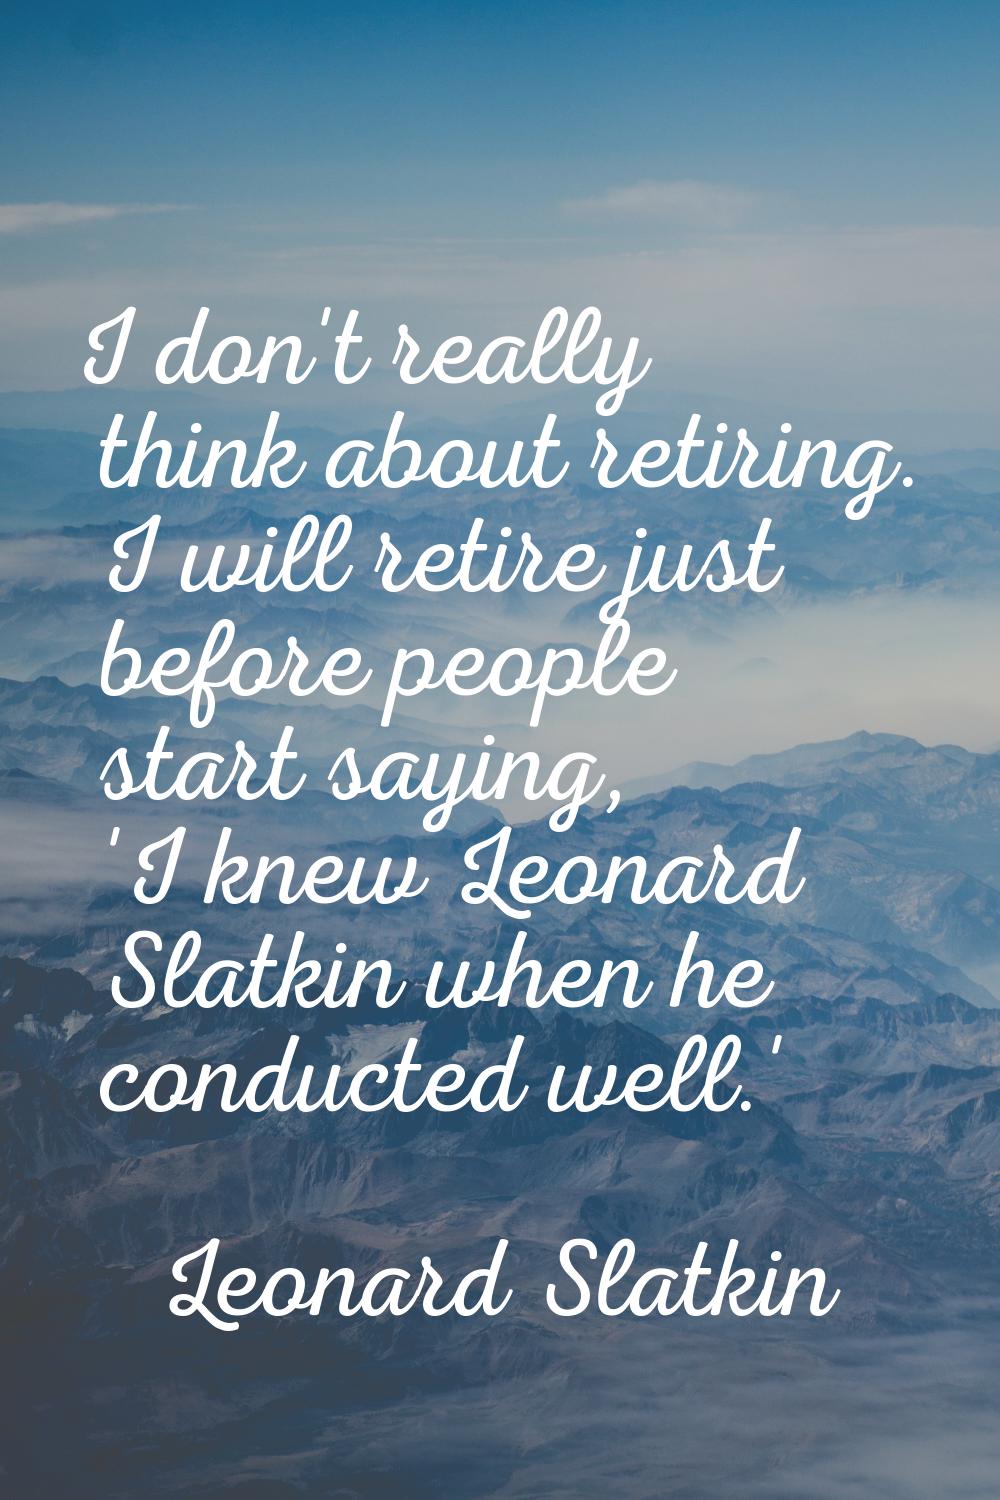 I don't really think about retiring. I will retire just before people start saying, 'I knew Leonard